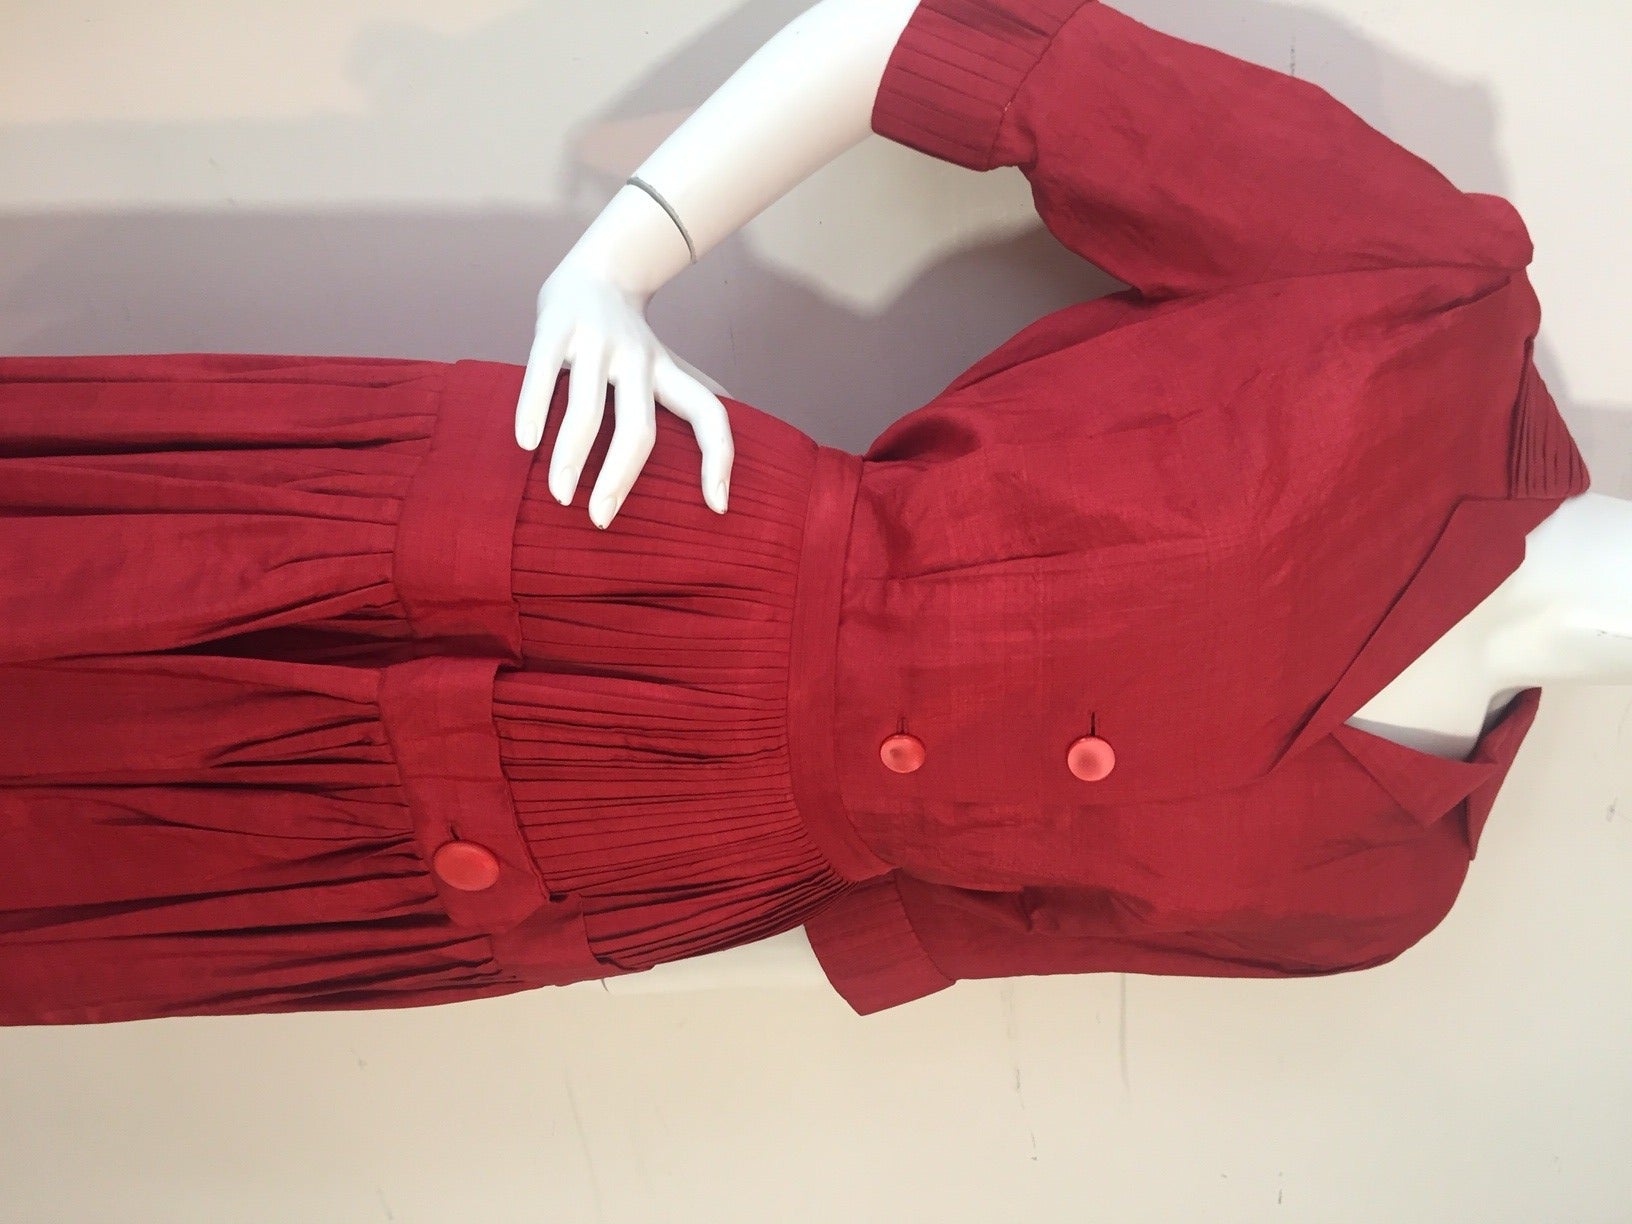 A gorgeous 1950s casual 2-piece cinnabar /red silk skirt and blouse set:  Button-down front with darts and 3/4 length sleeves.  Cuffs of blouse are pleated like skirt.  Skirt is full and heavily pleated with a button embellished band at hip.  Skirt